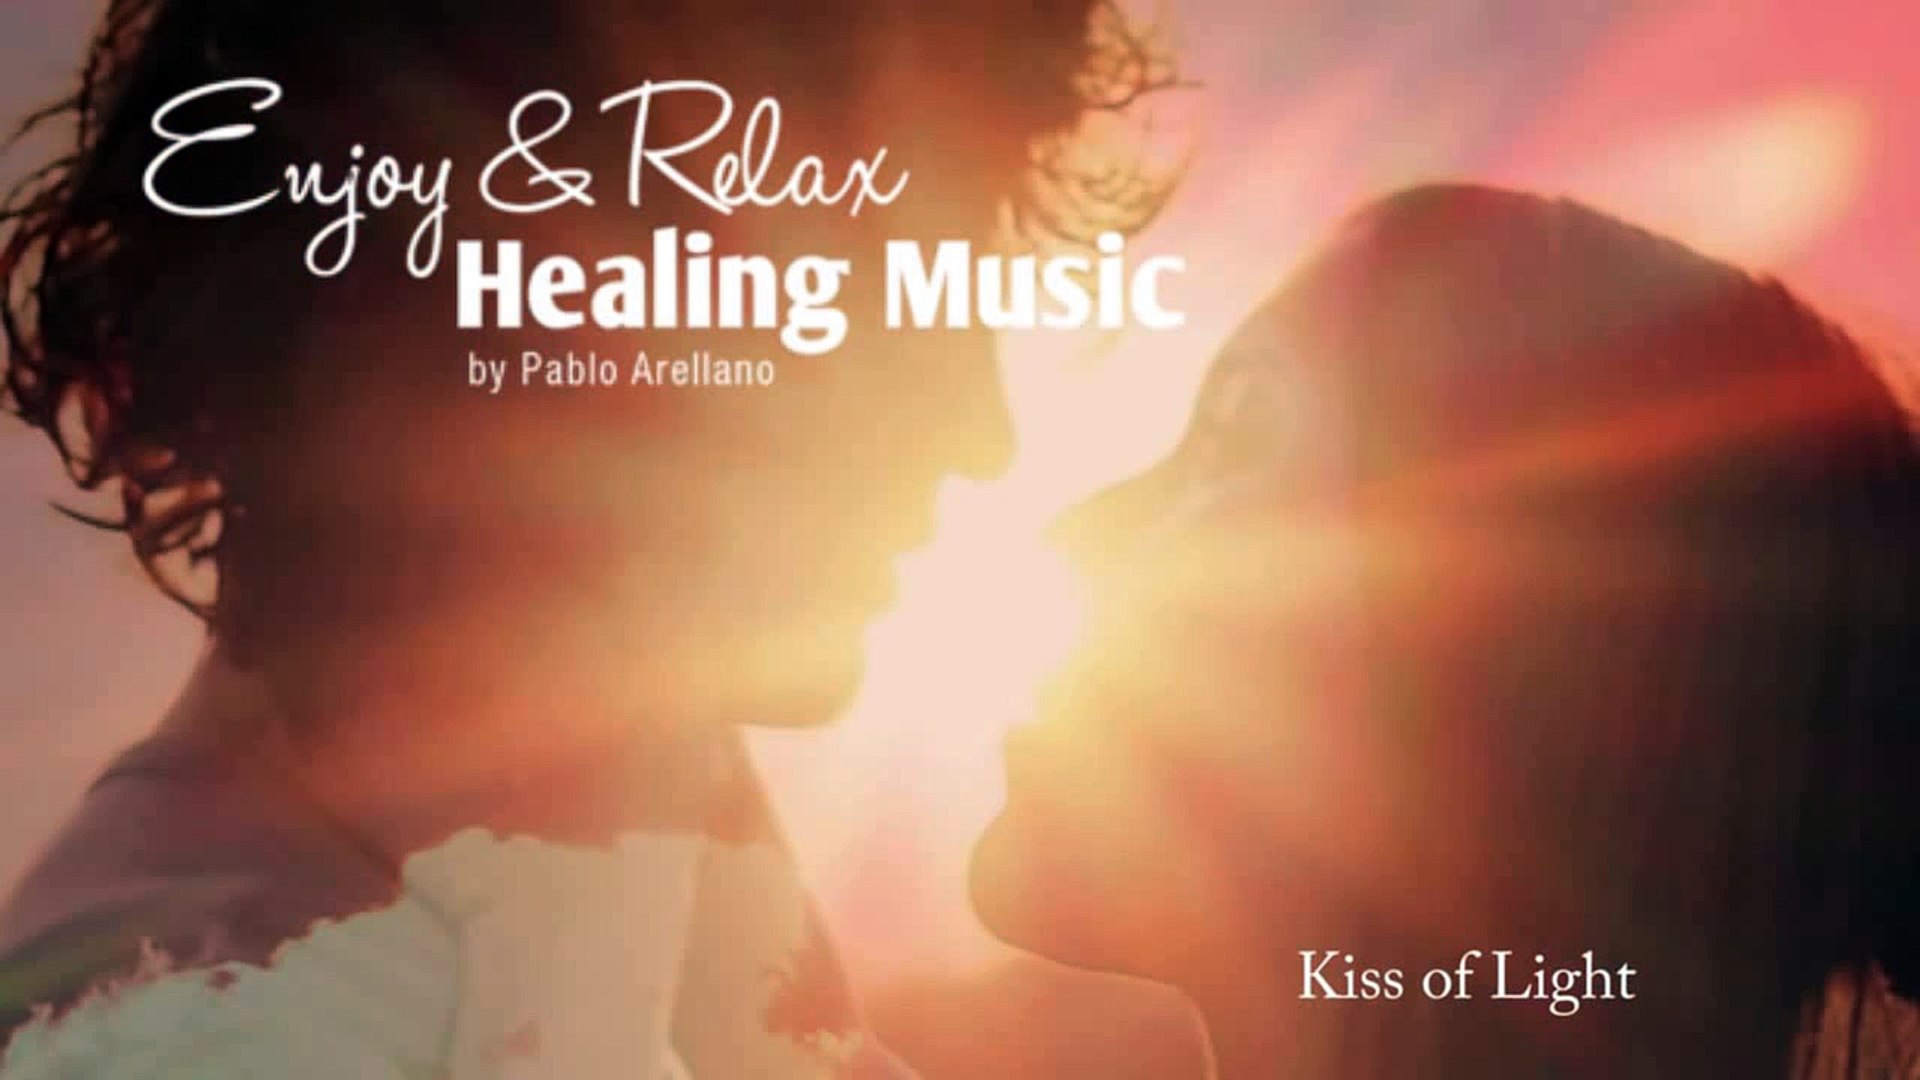 Healing And Relaxing Music For Meditation (Kiss Of Light) - Pablo Arellano